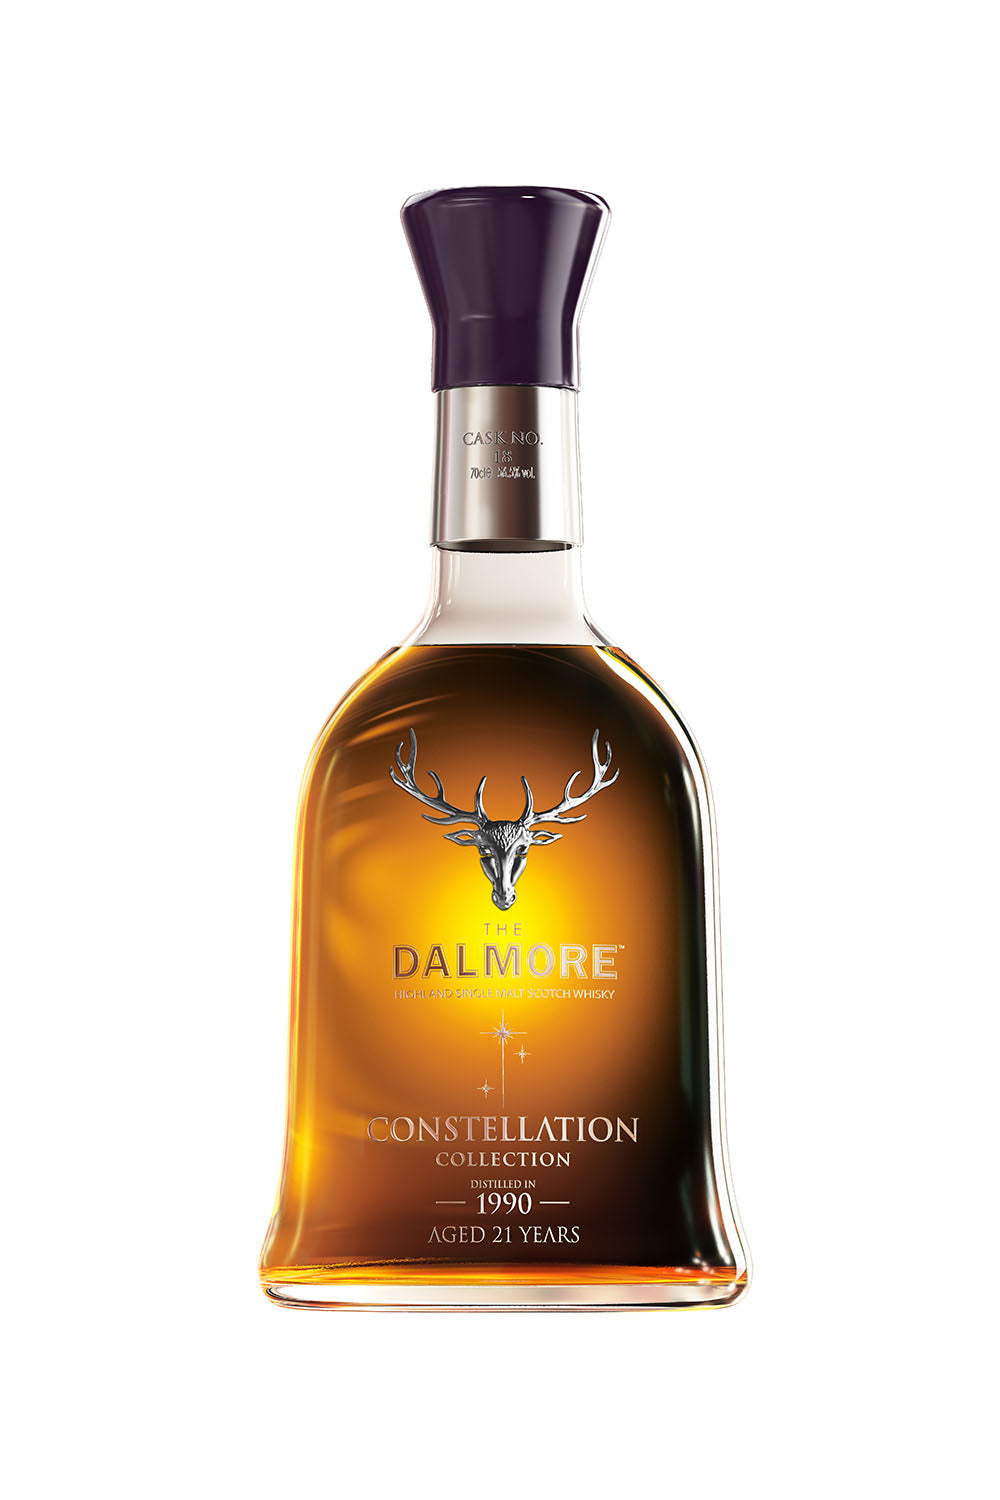 The Dalmore 1990 Constellation - Cask 18